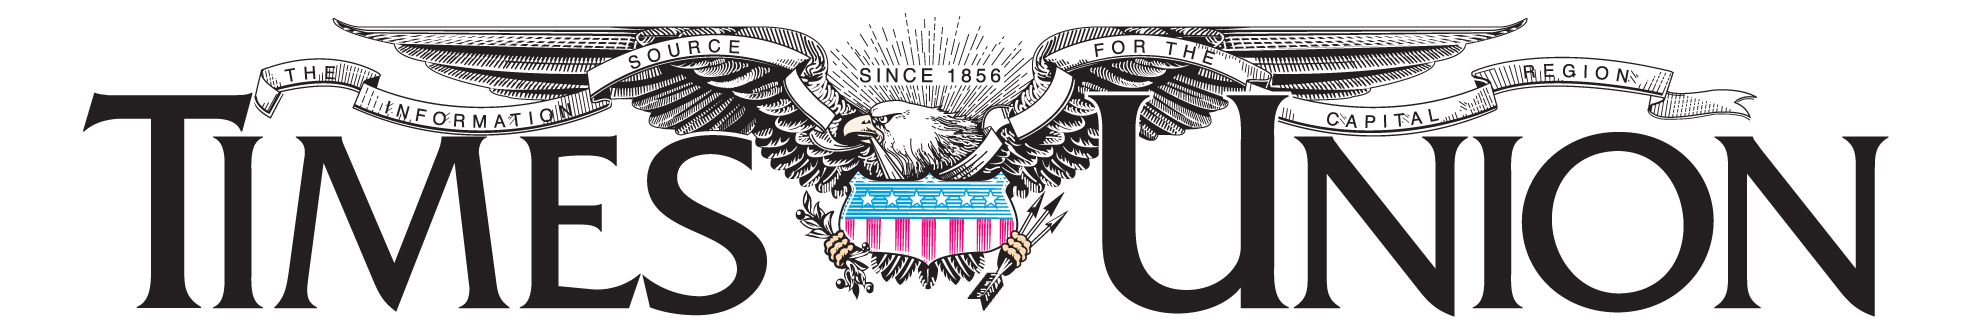 Times Union logo, with slogan "The information source for the Capital Region since 1856."